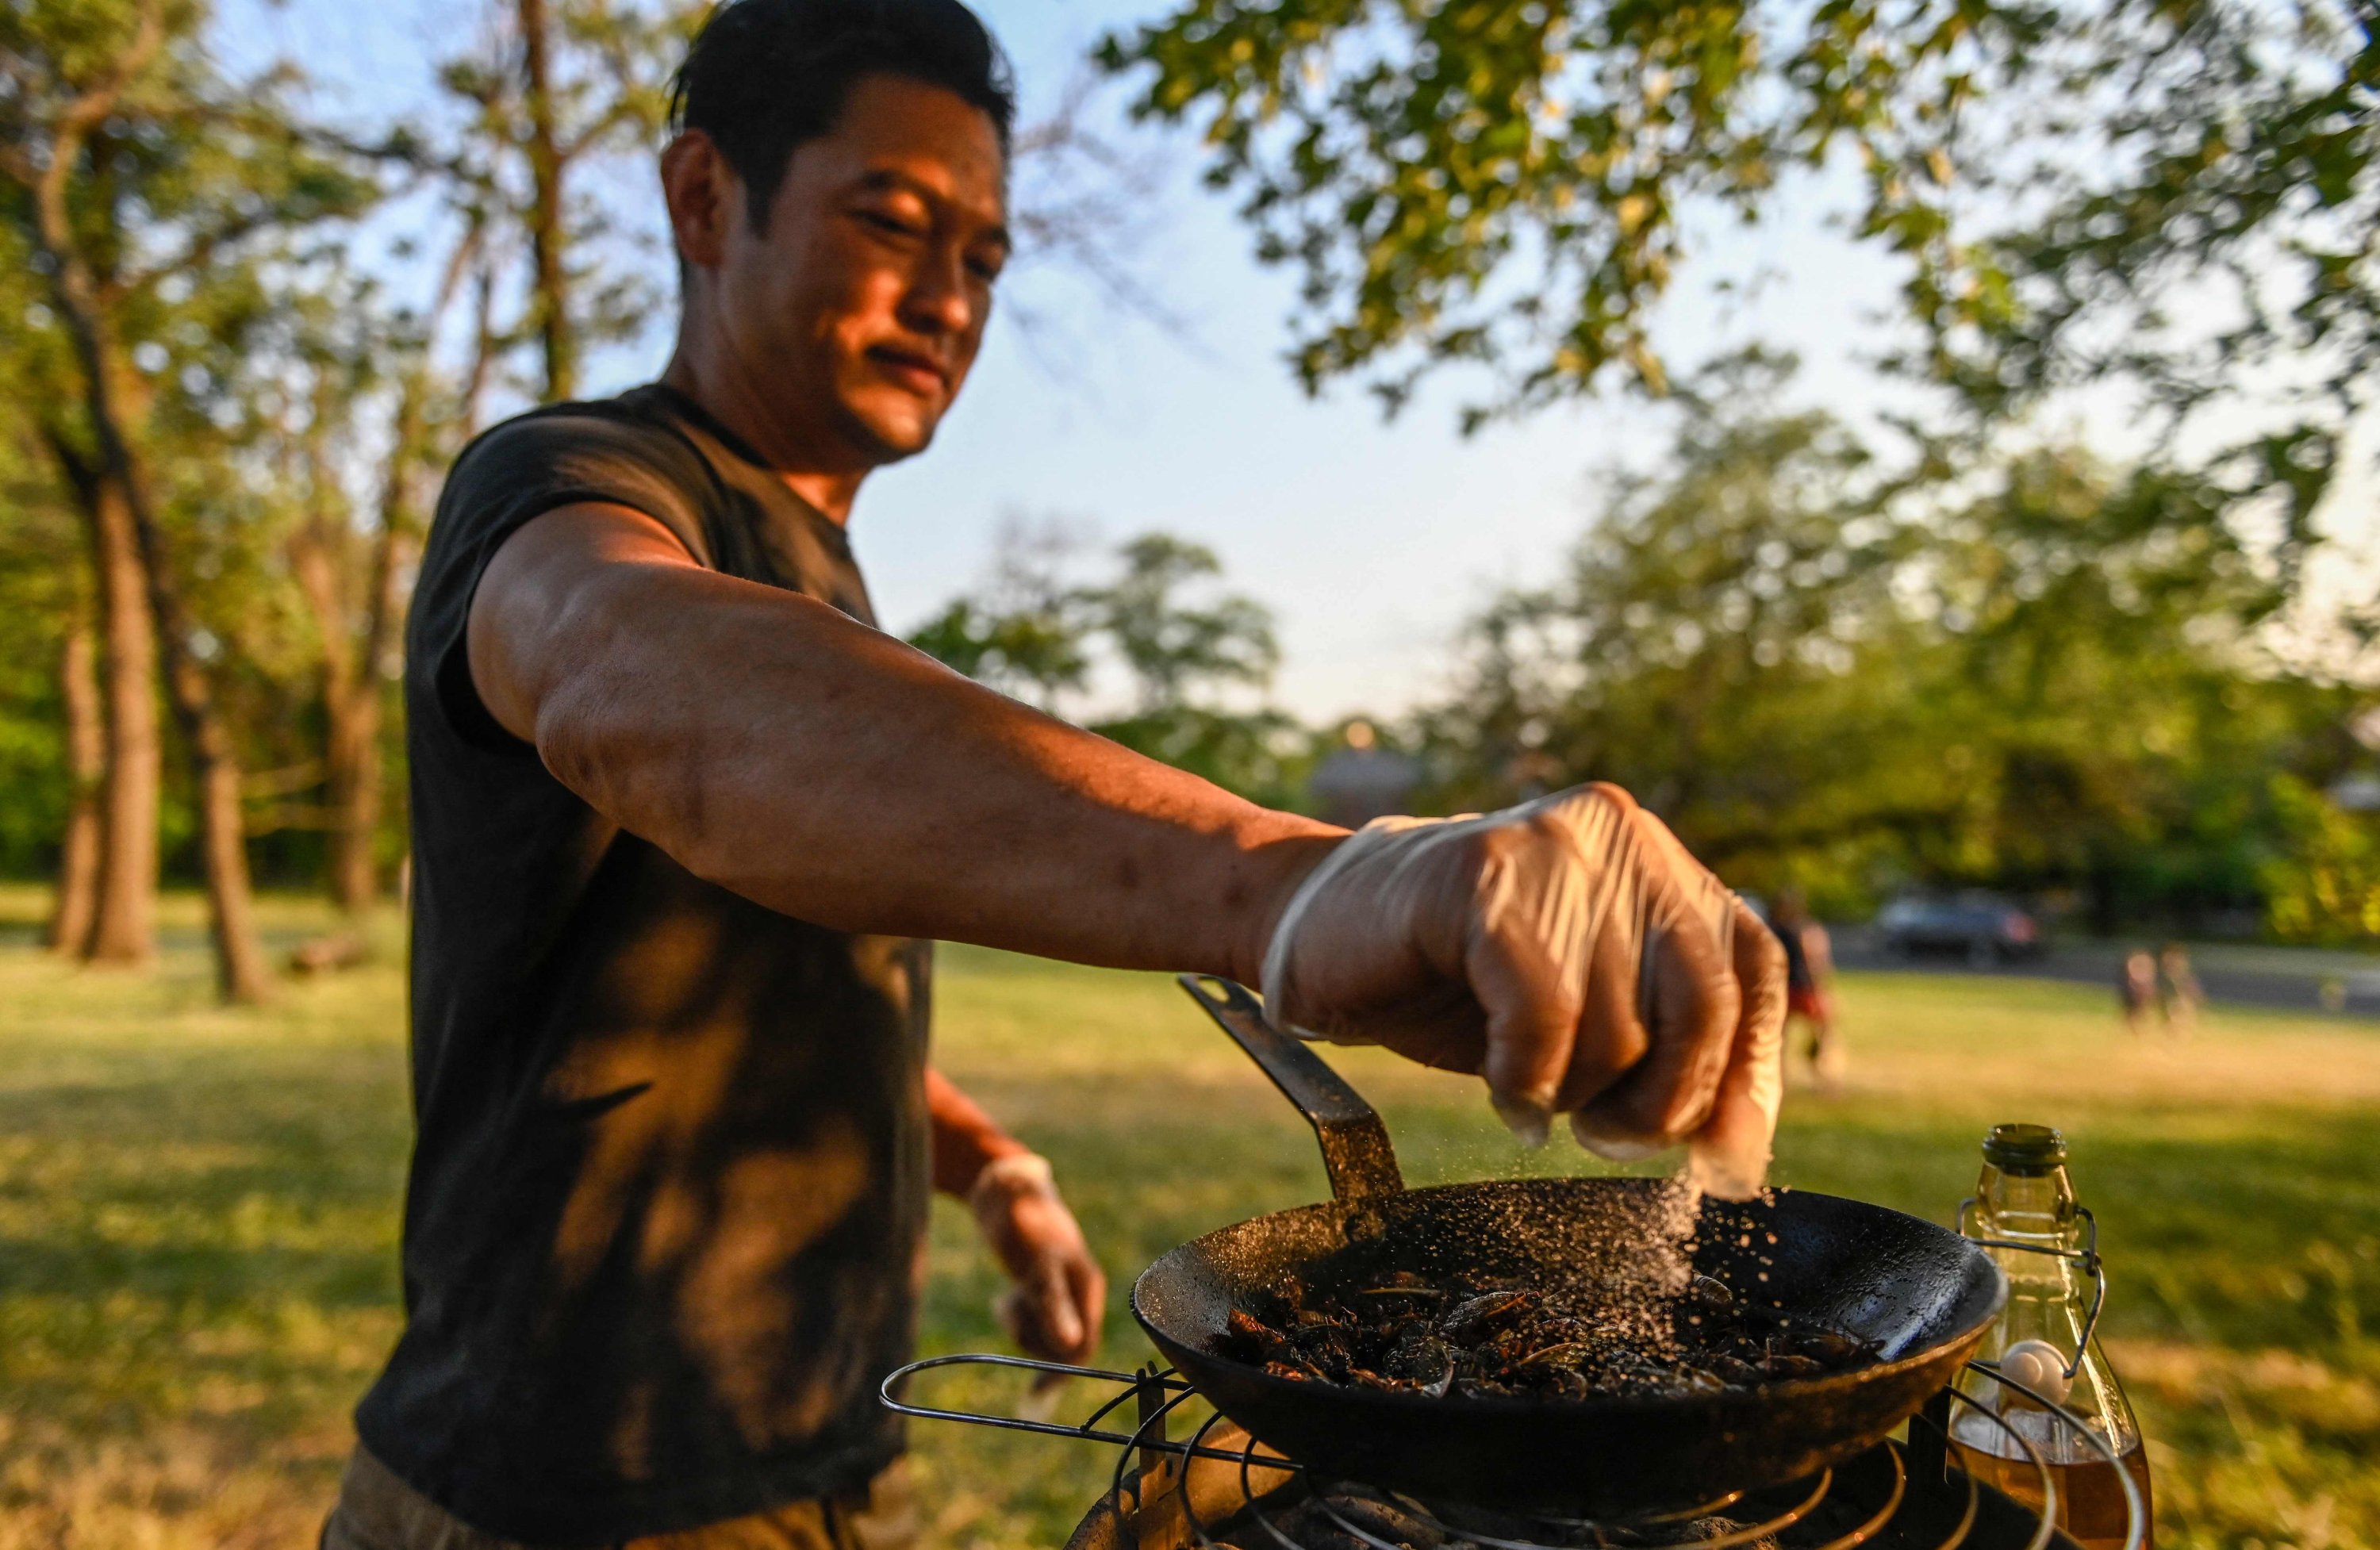 Chef Bun Lai seasons cicadas with salt as he fries them at Fort Totten Park in Washington, U.S., May 23, 2021. (AFP Photo)